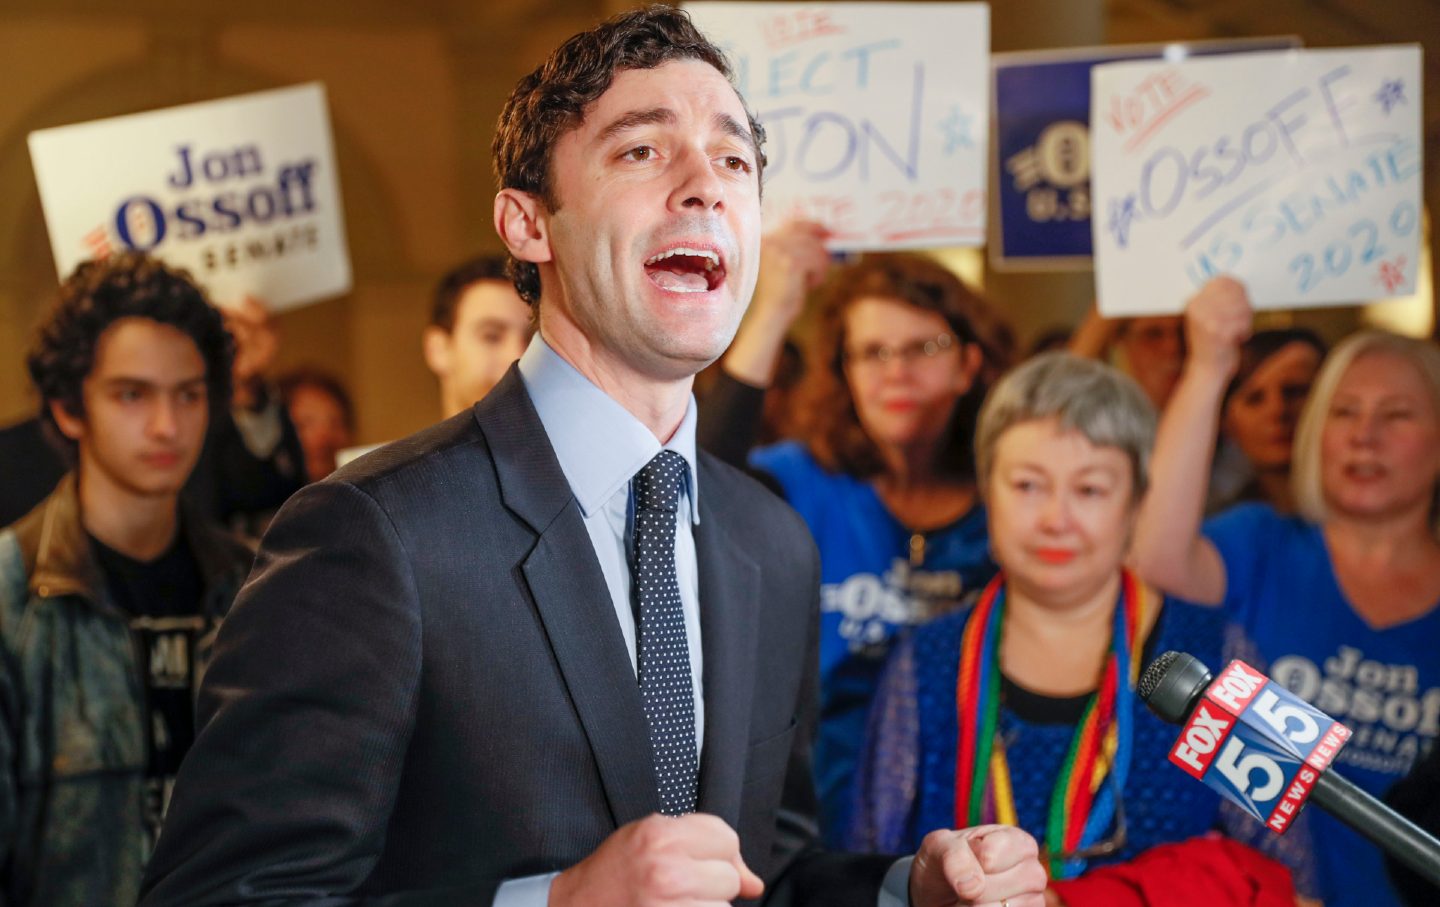 Jon Ossoff speaks to the media, surrounded by a supportive crowd.